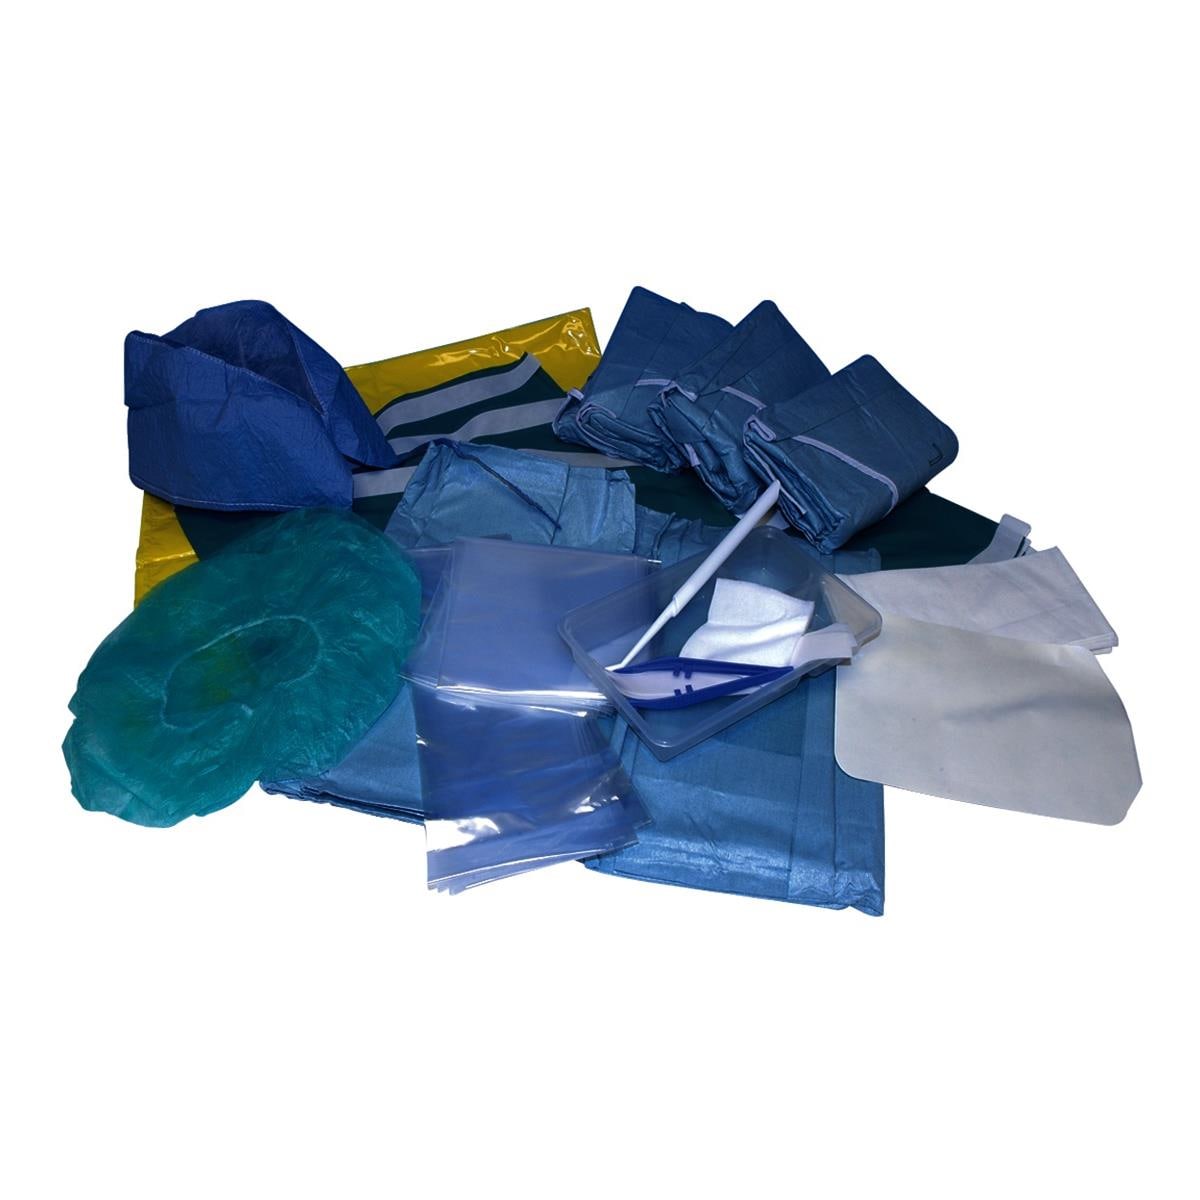 Surgikit 1 Sterile Disposable Surgery Pack